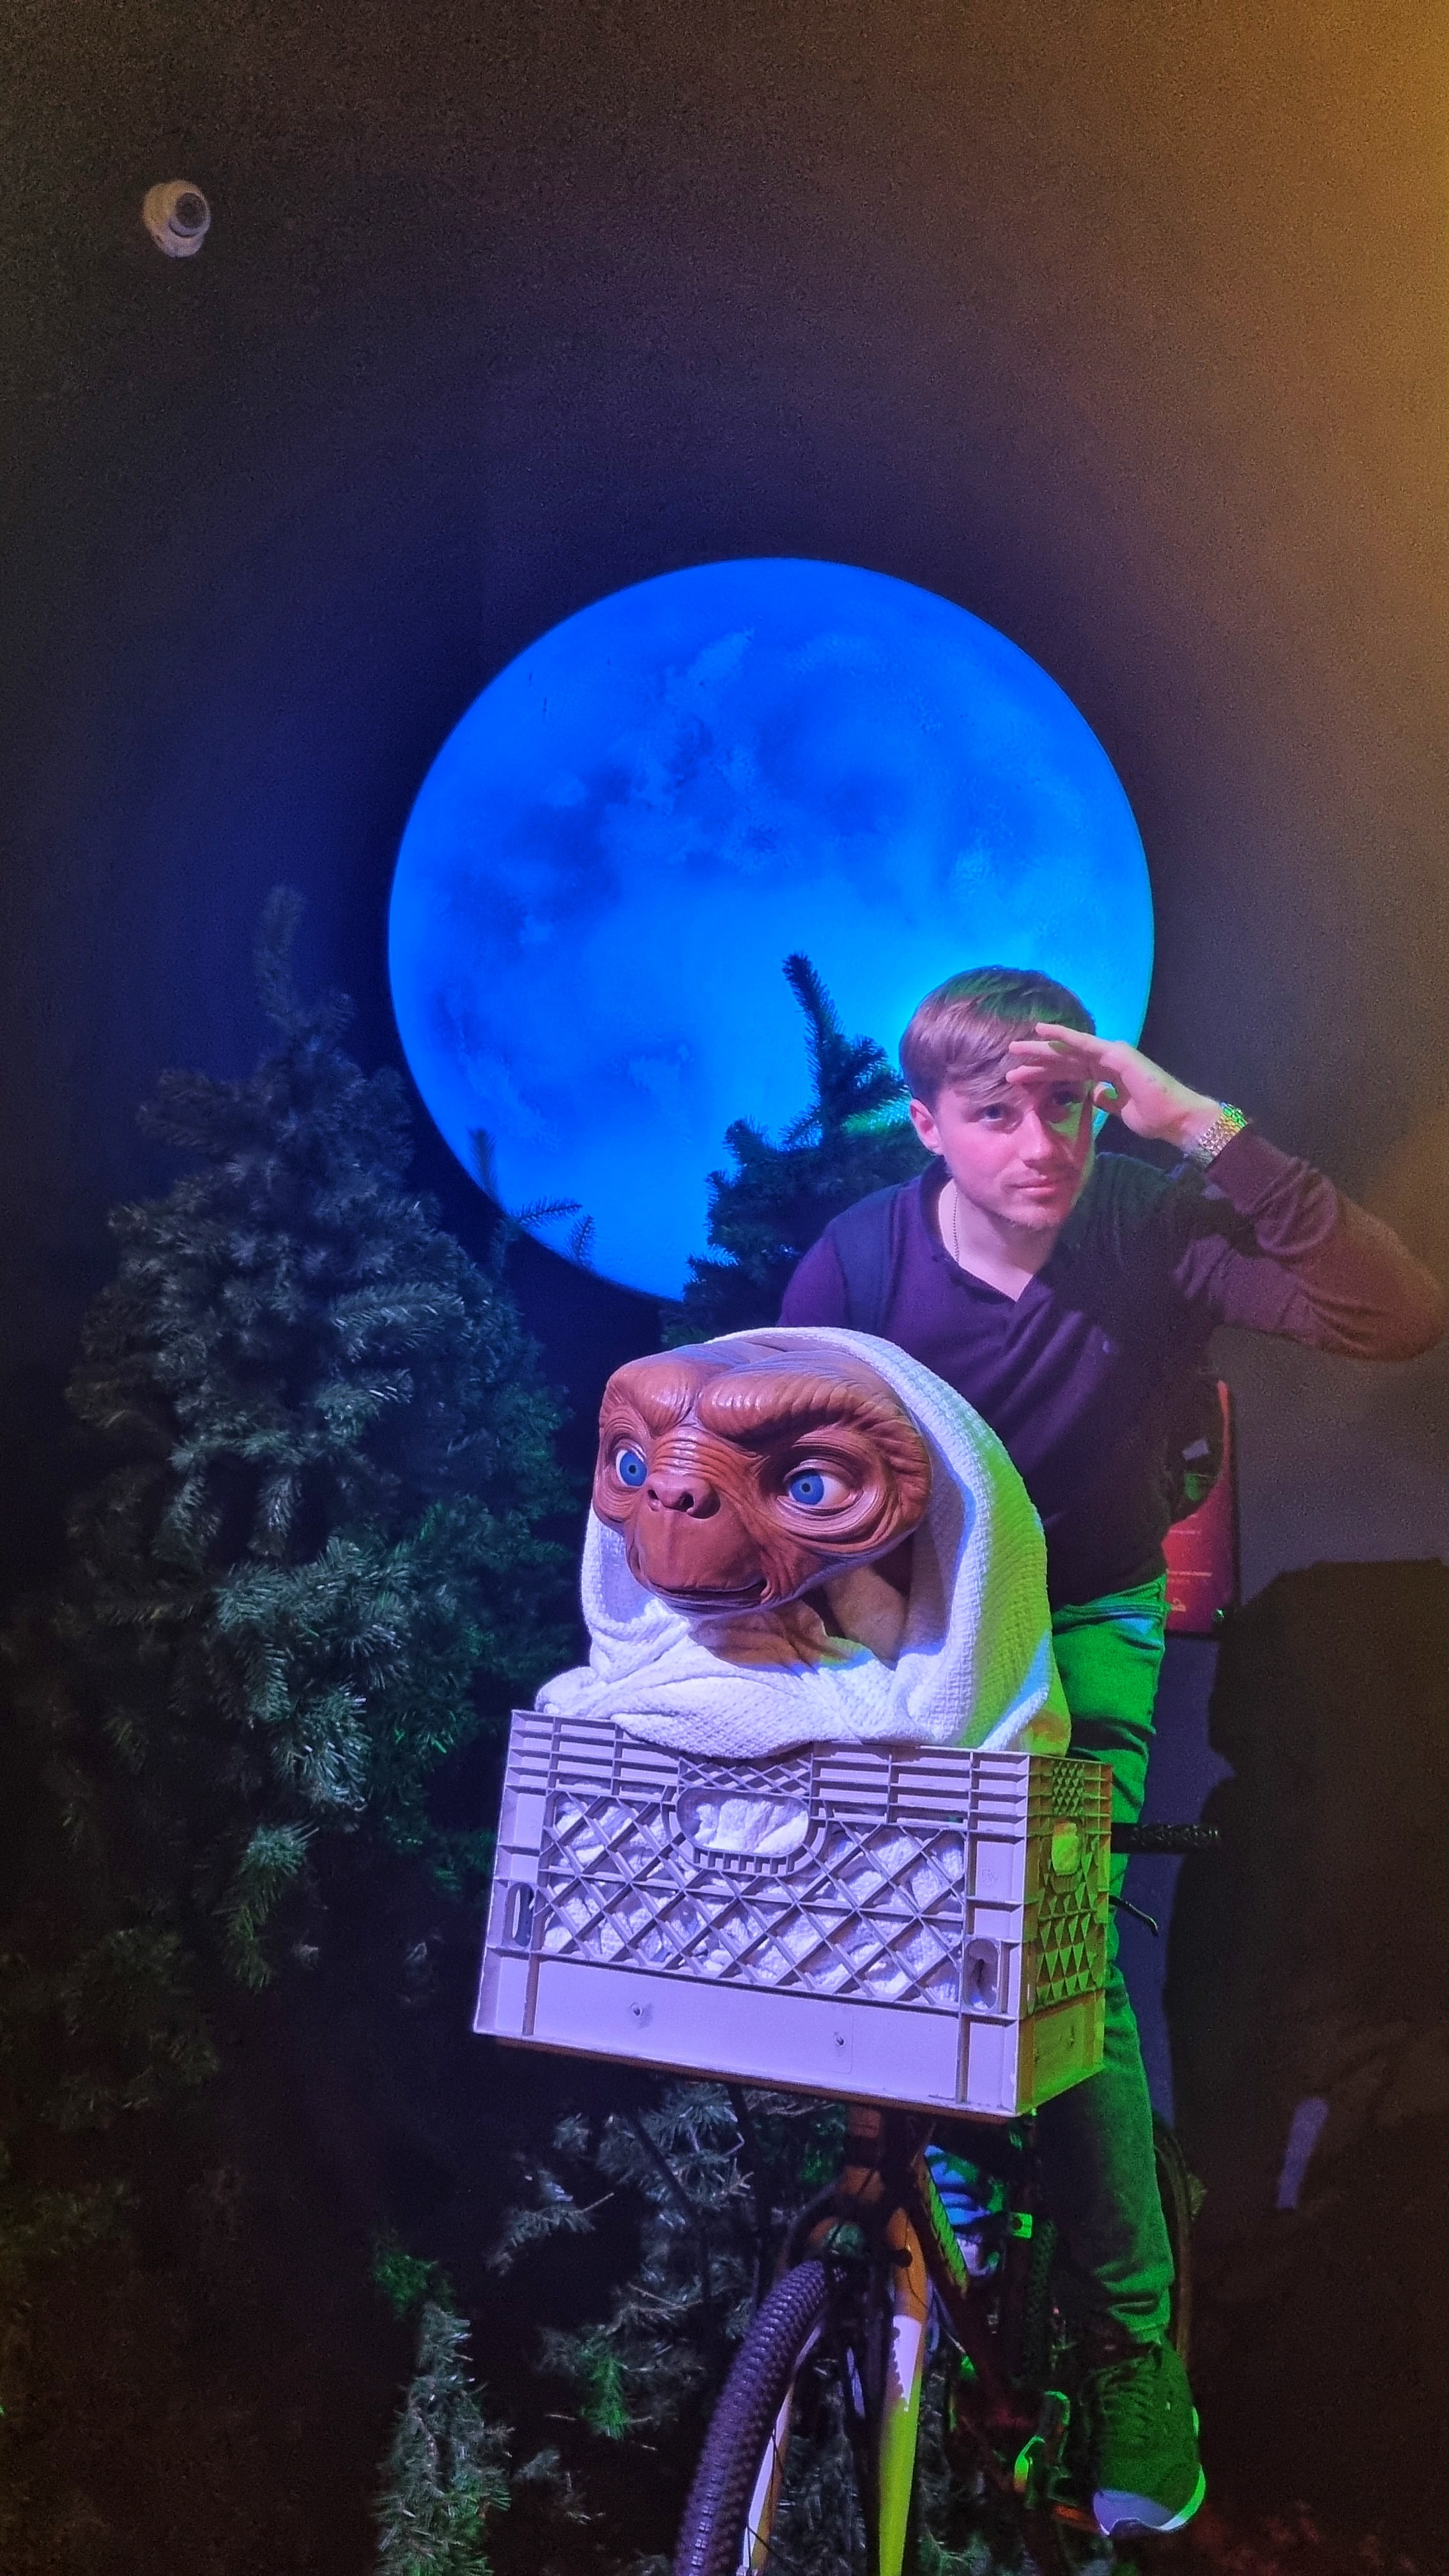 Liam enjoying the waxwork of E.T at Madame Tussauds.